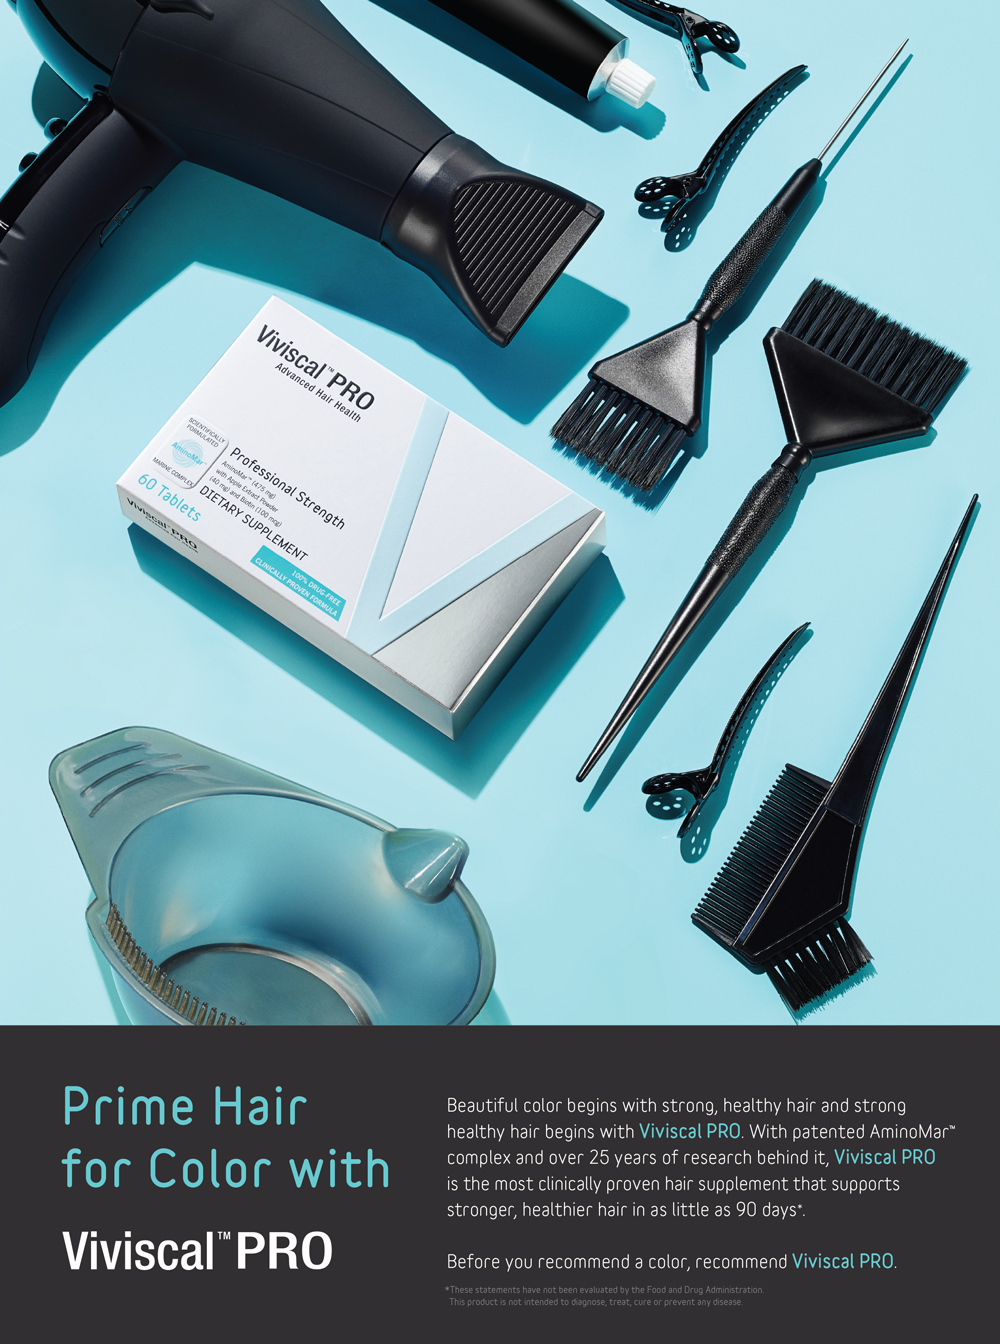 Prime Hair for Color with Viviscal PRO